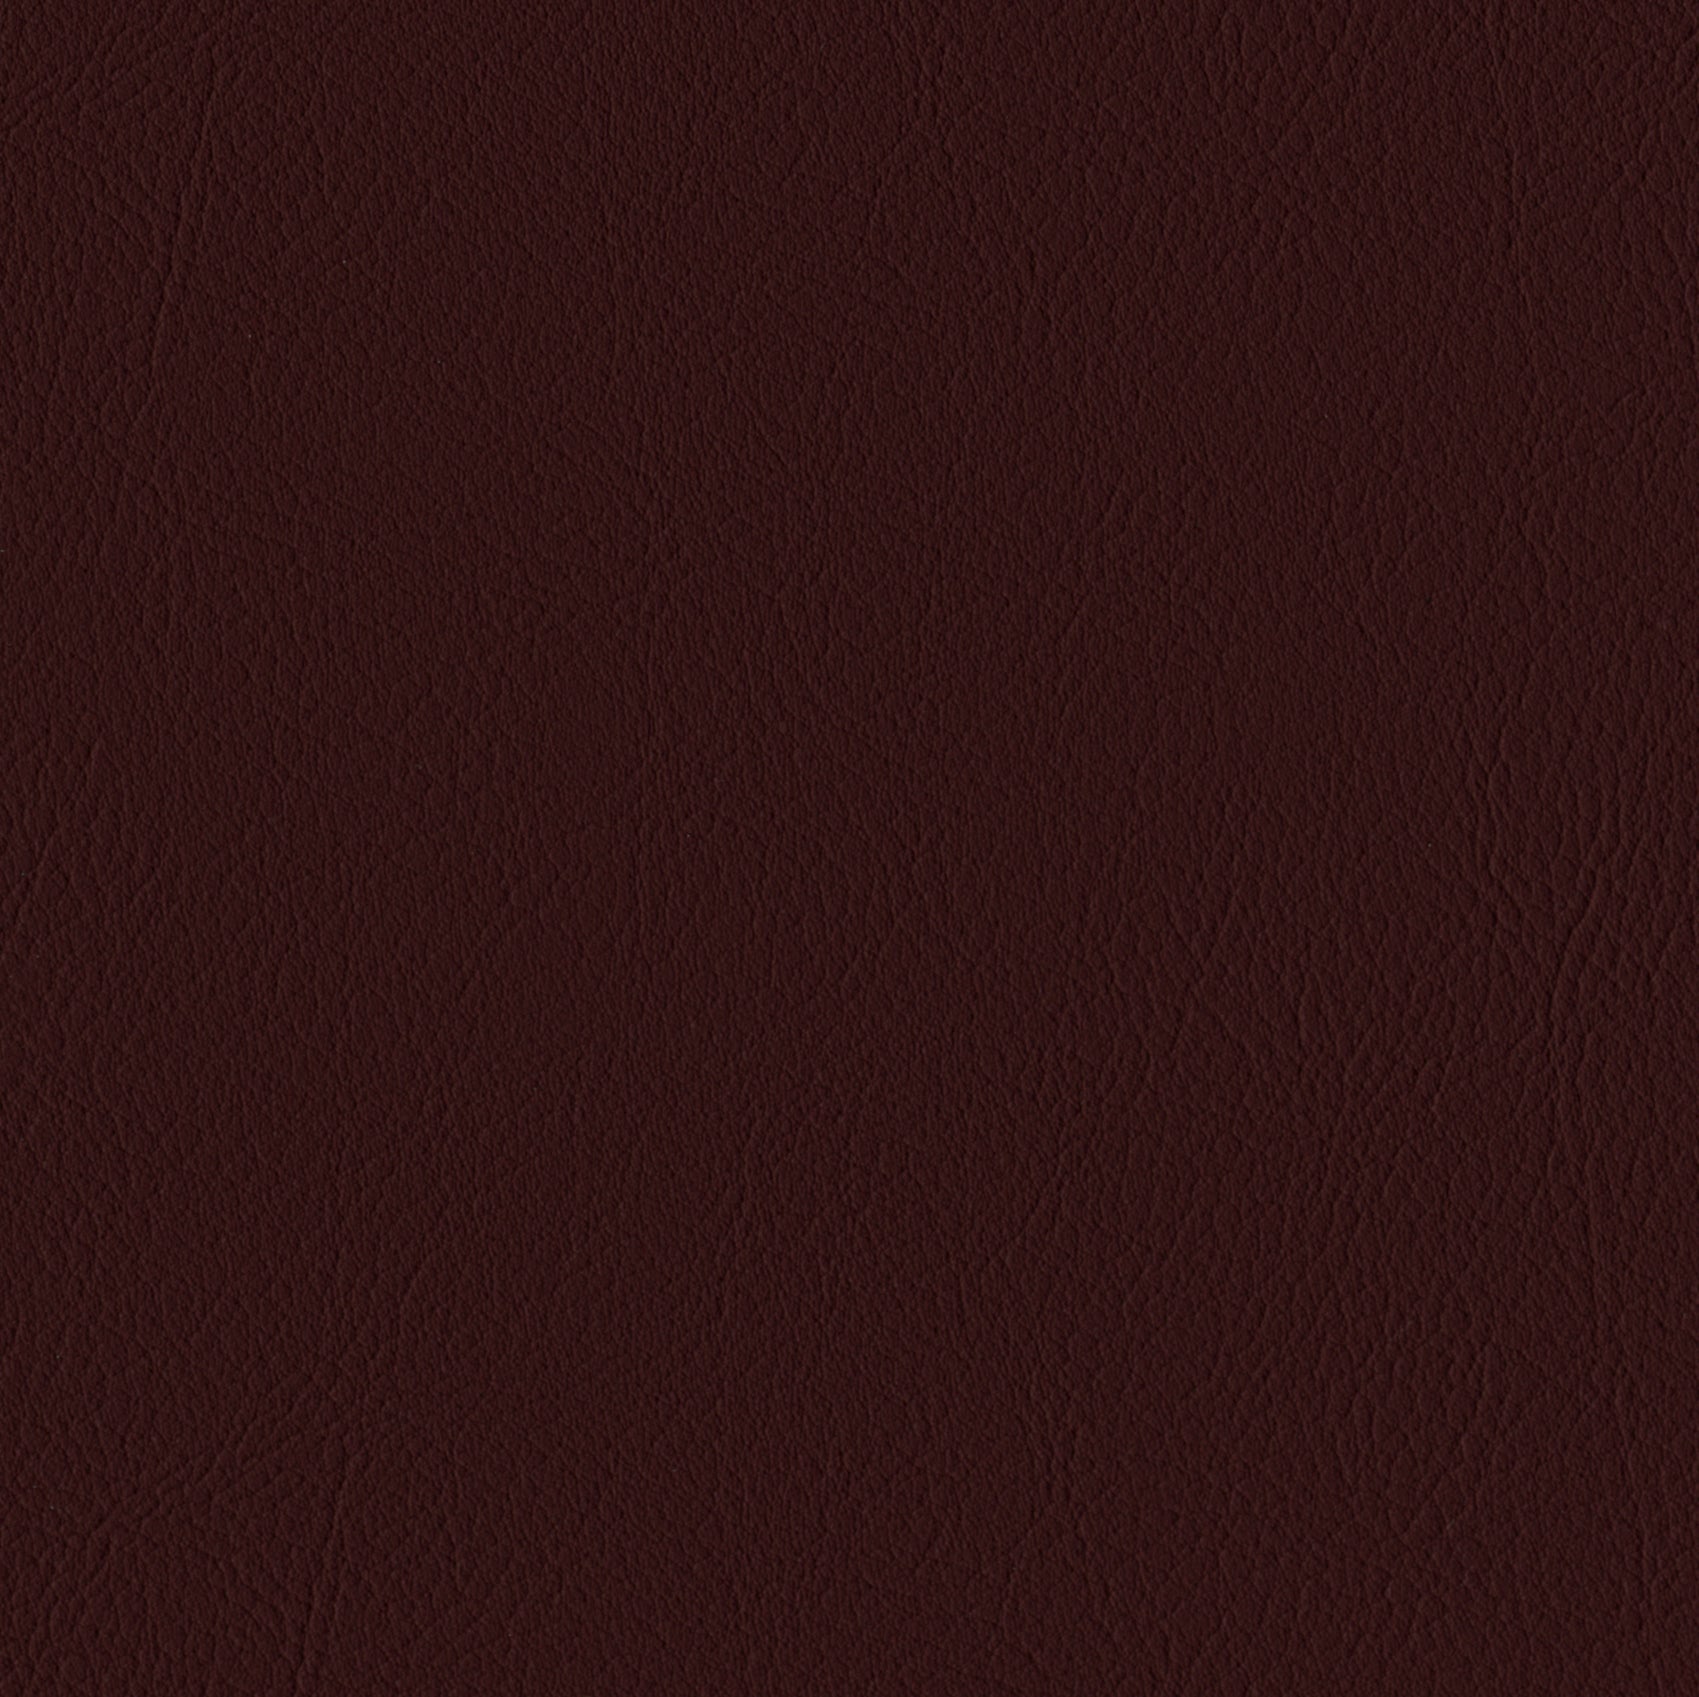 Andriali-Contract-Vinyl_Upholstery-Design-LegacyFR-Color-280Mahogany-Width-140cm